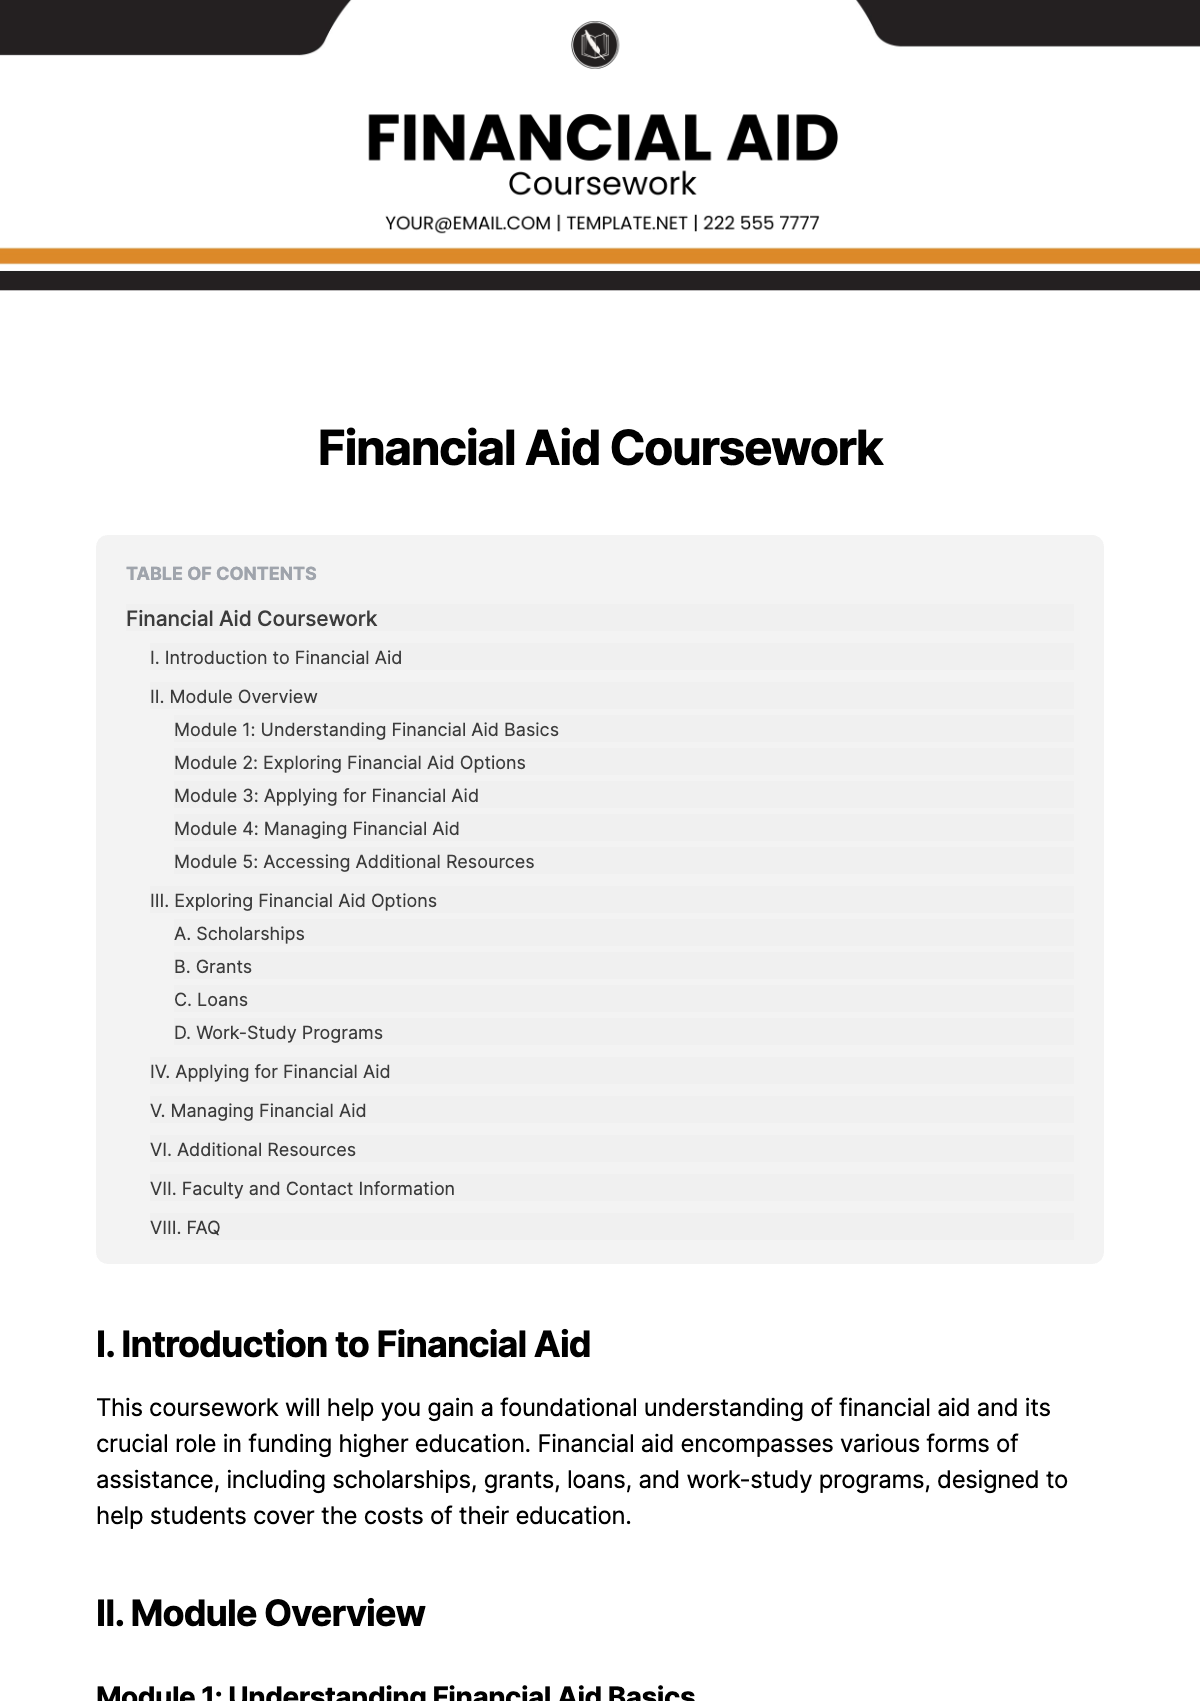 Financial Aid Coursework Template